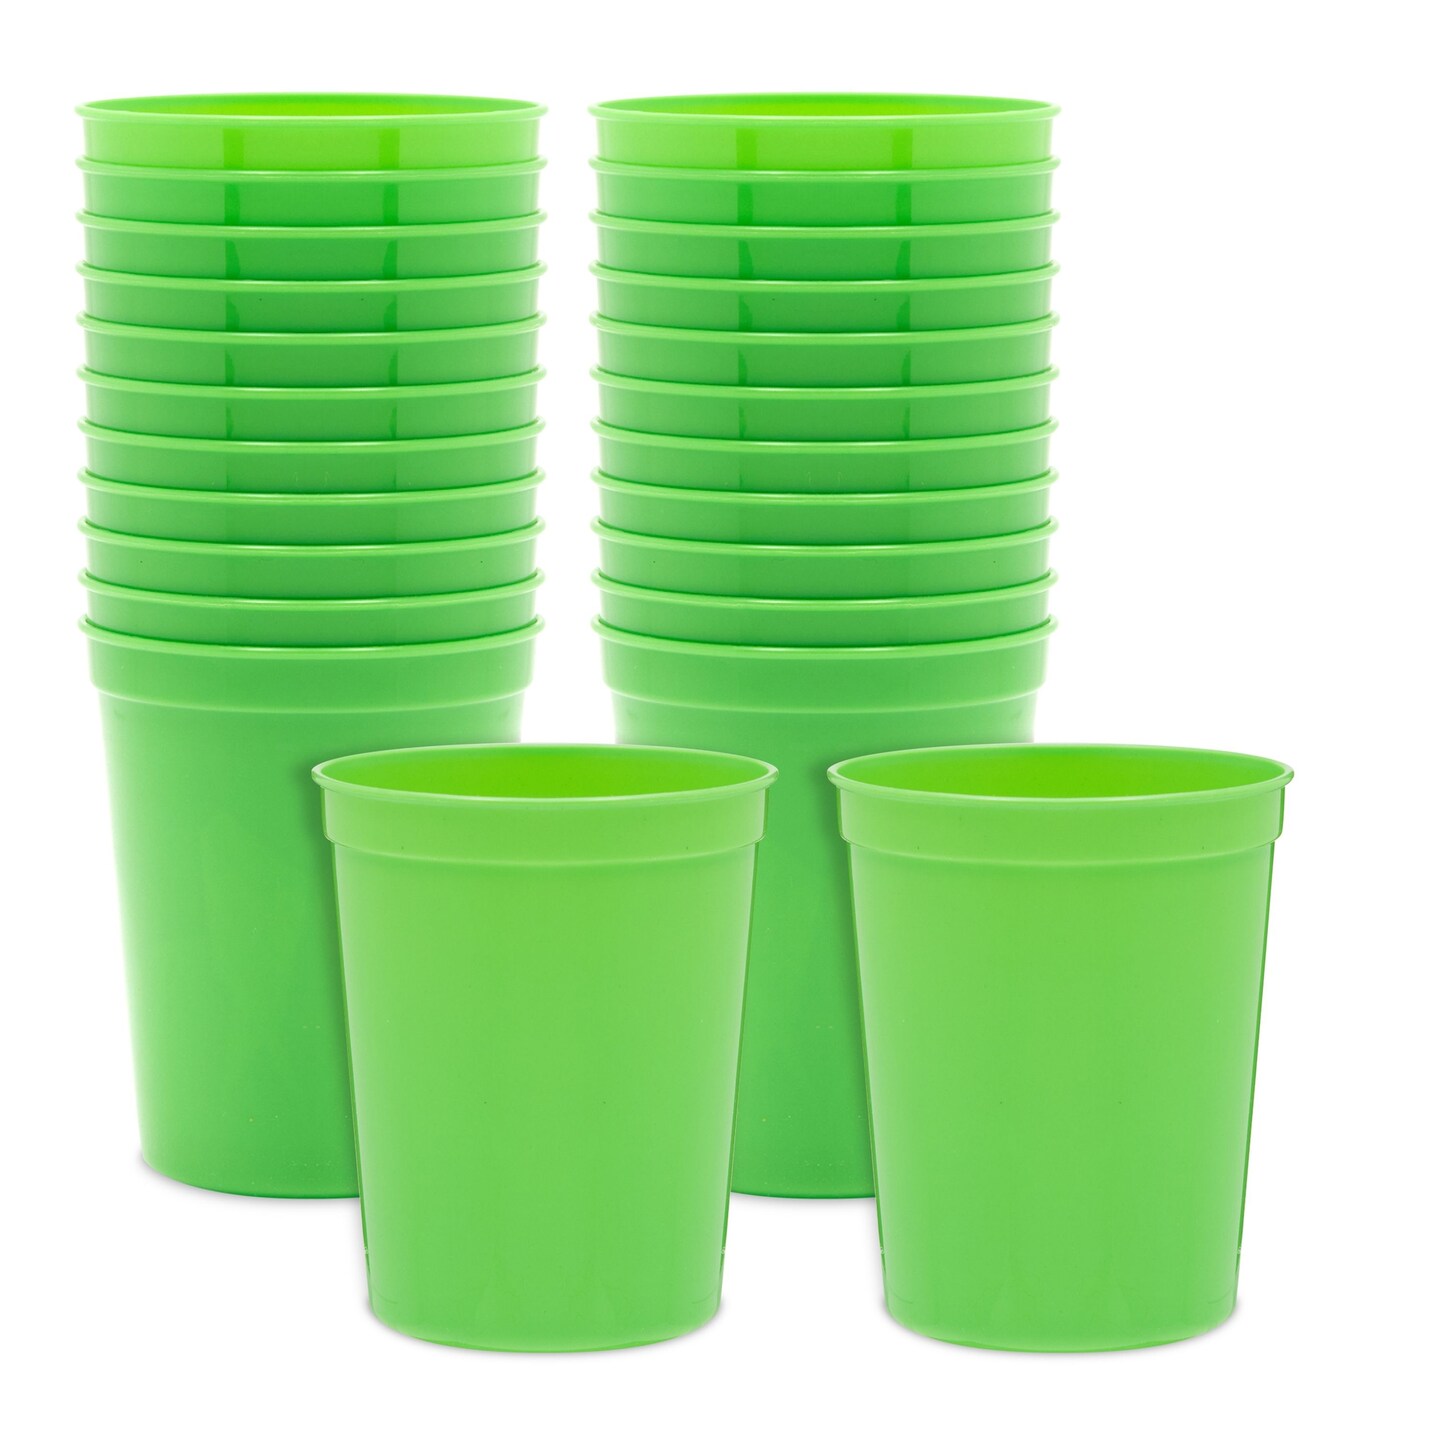 Frosted Plastic Stadium Cup 16 oz. Set of 10, Bulk Pack - Shatterproof,  Flexible, Reusable Party Cups - Green